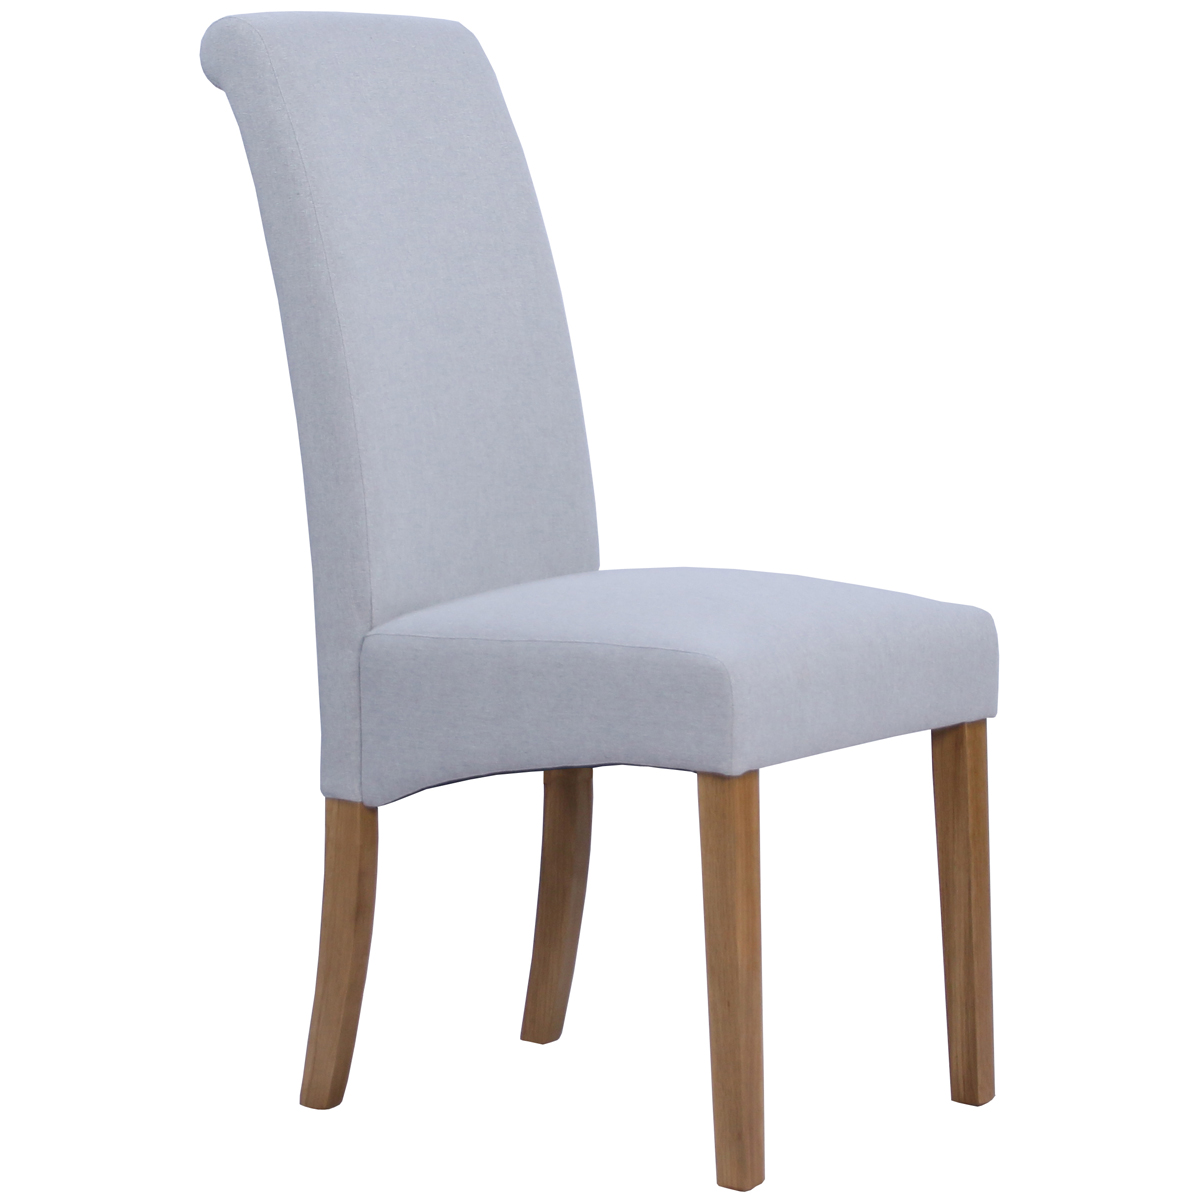 New Oak WES013 Dining Chair